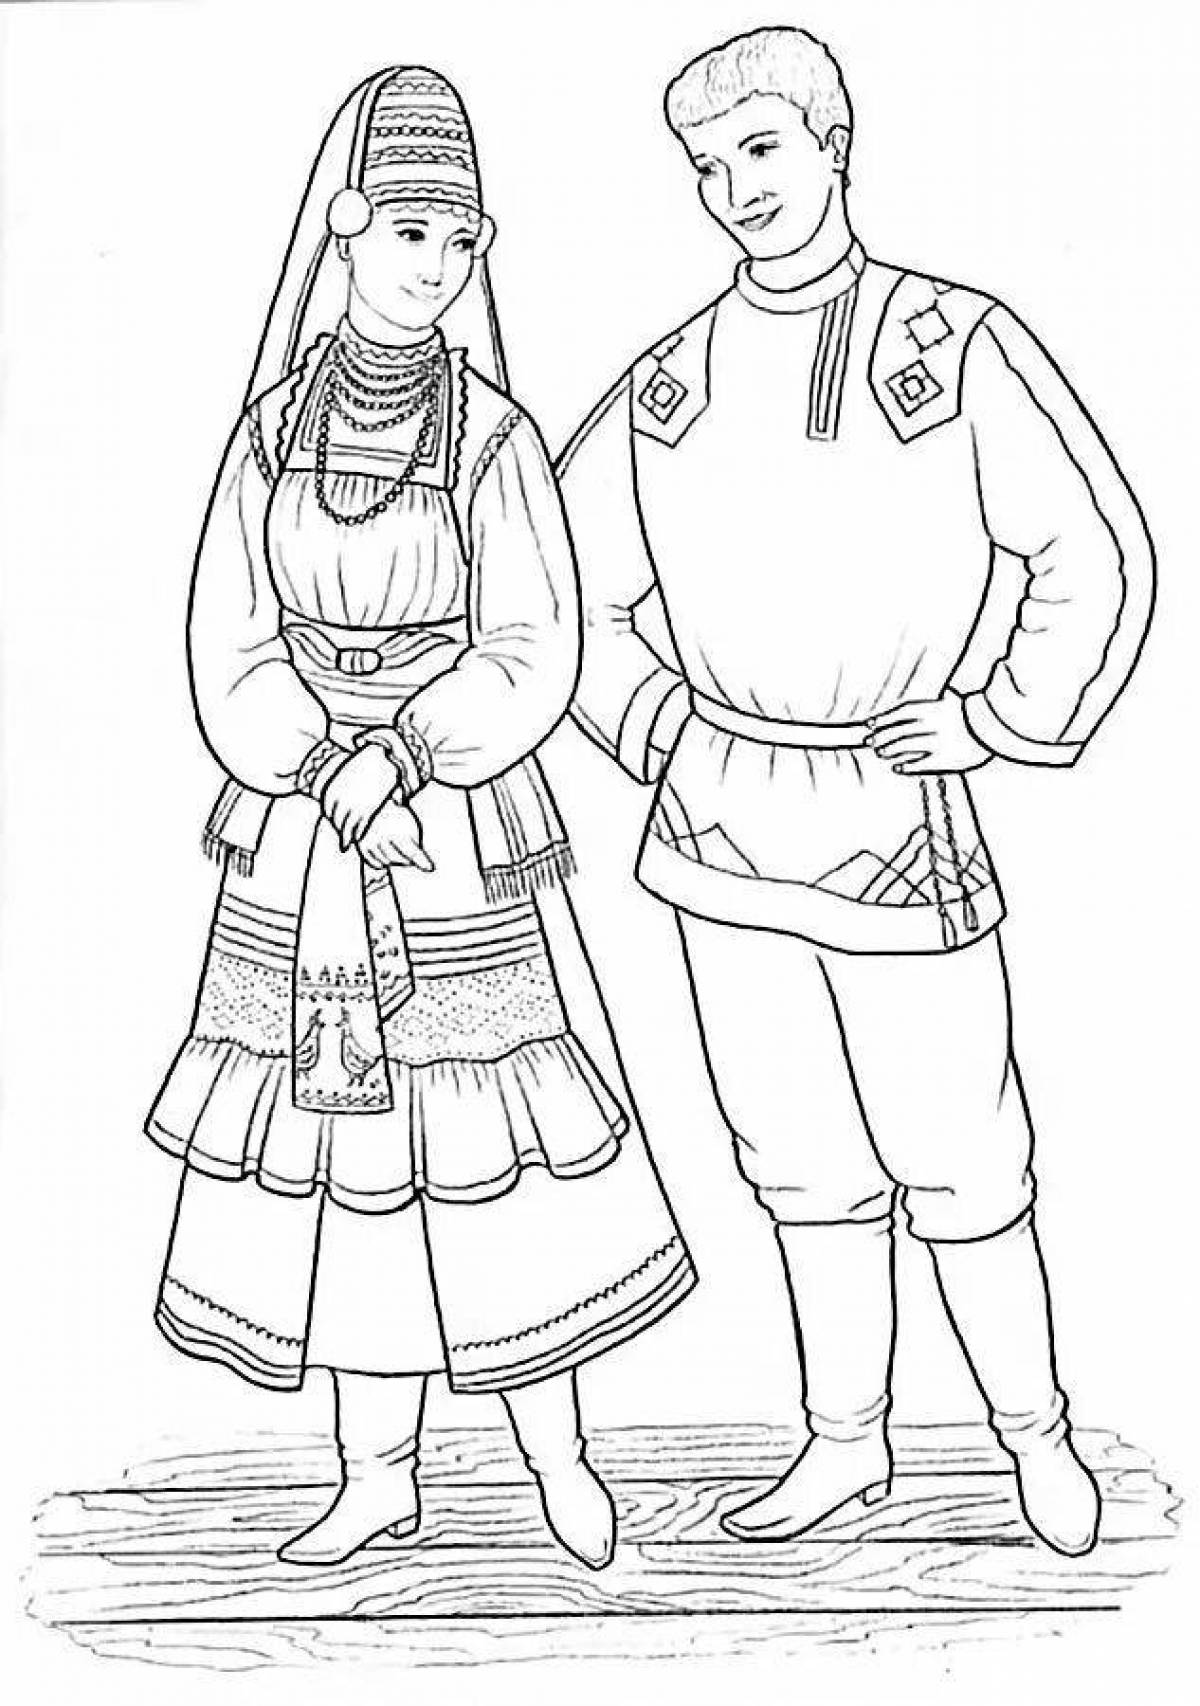 Coloring page shining Udmurt costume